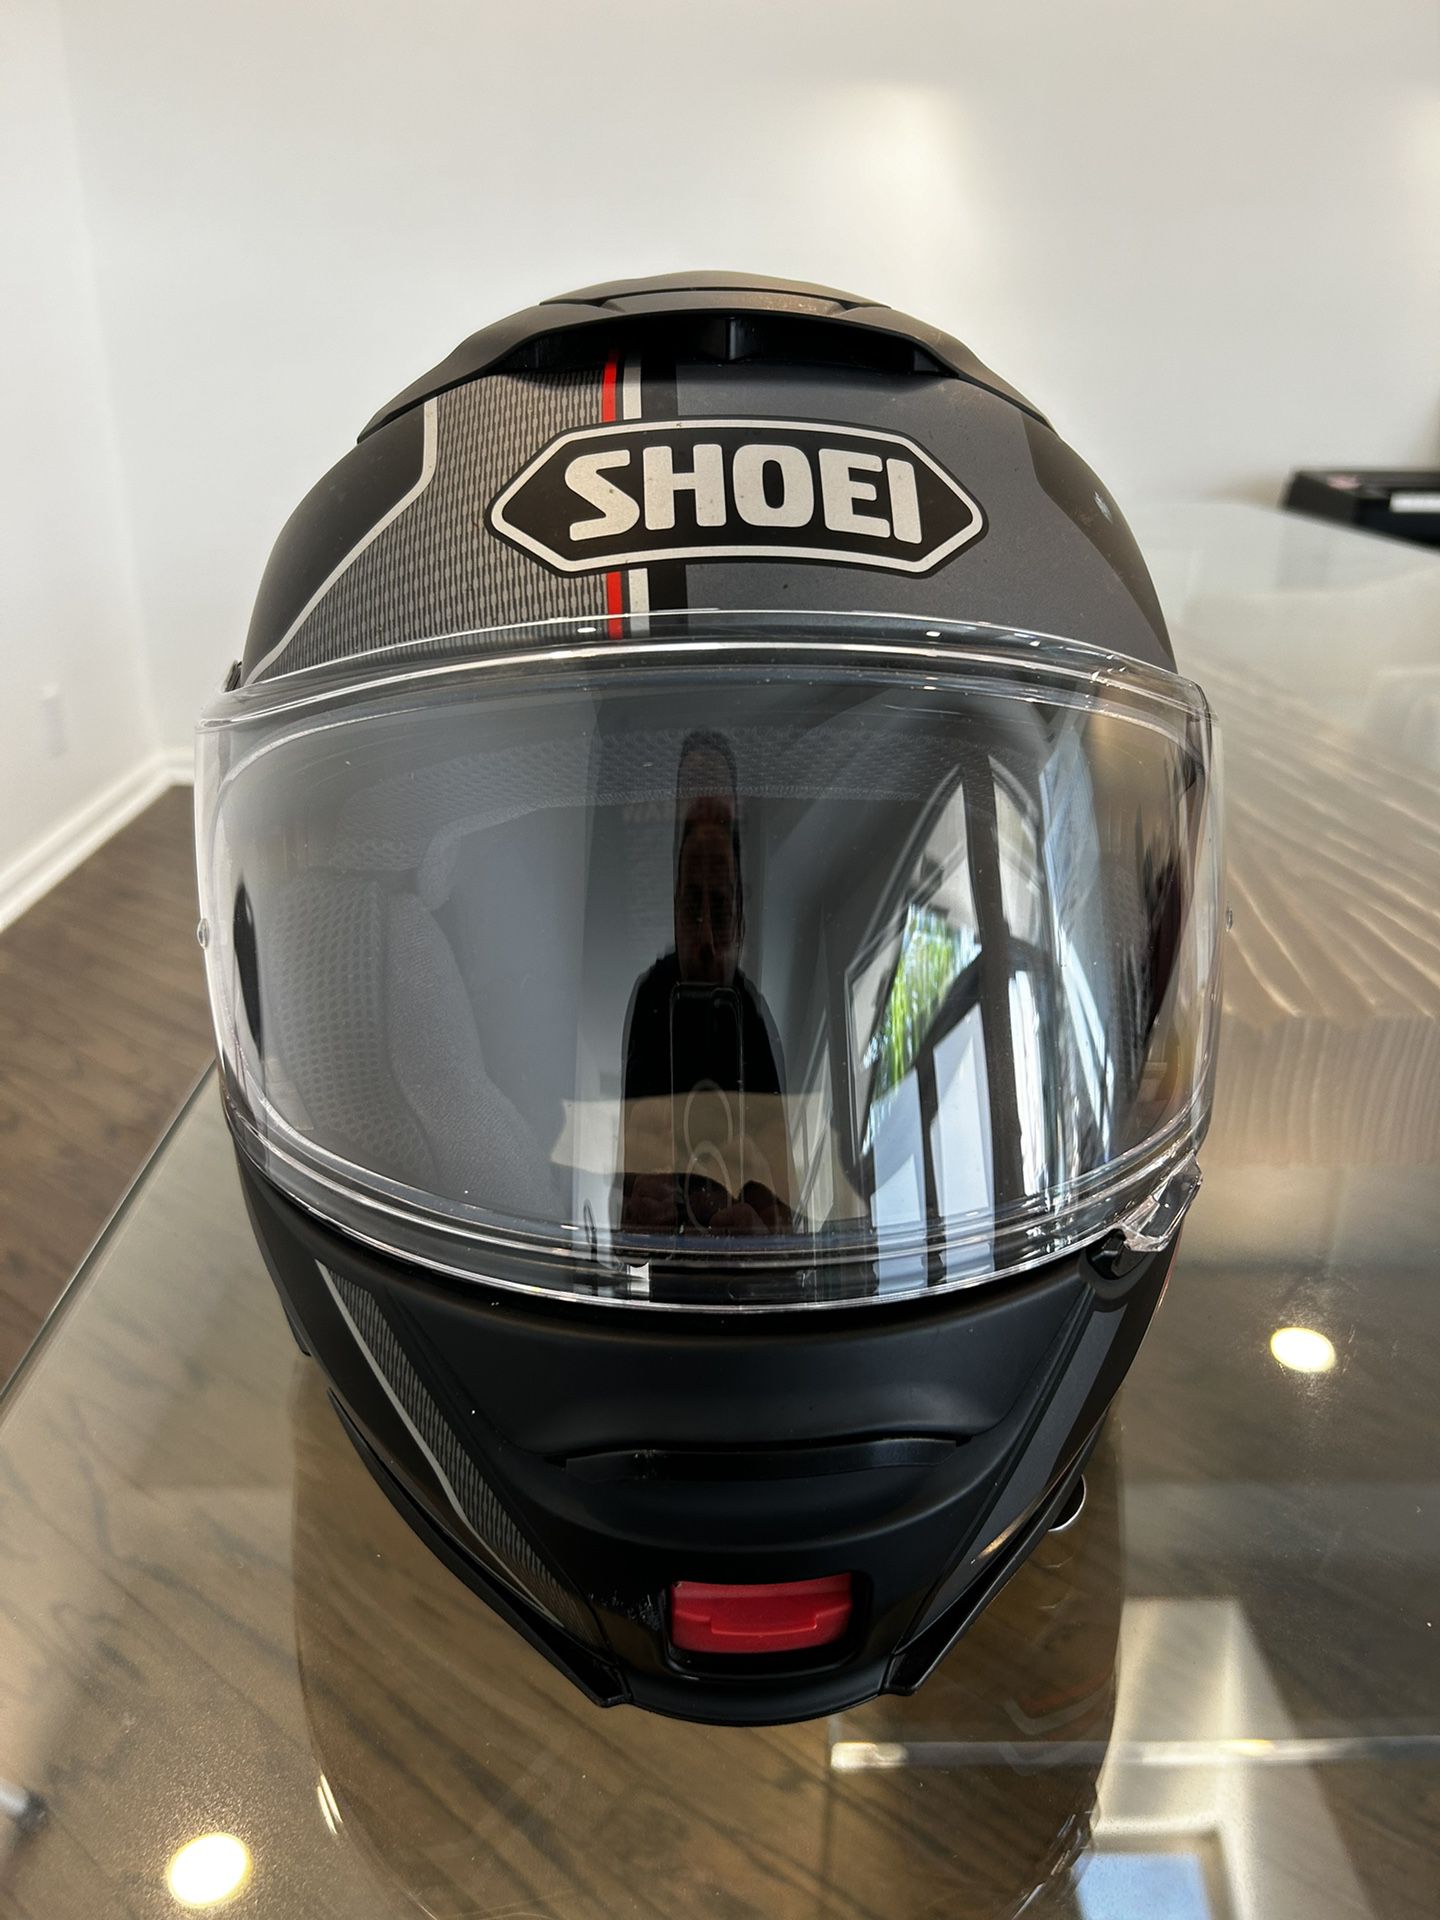 Shoei Neotec 2 With Built In Sena SRL Bluetooth System and Pinlock